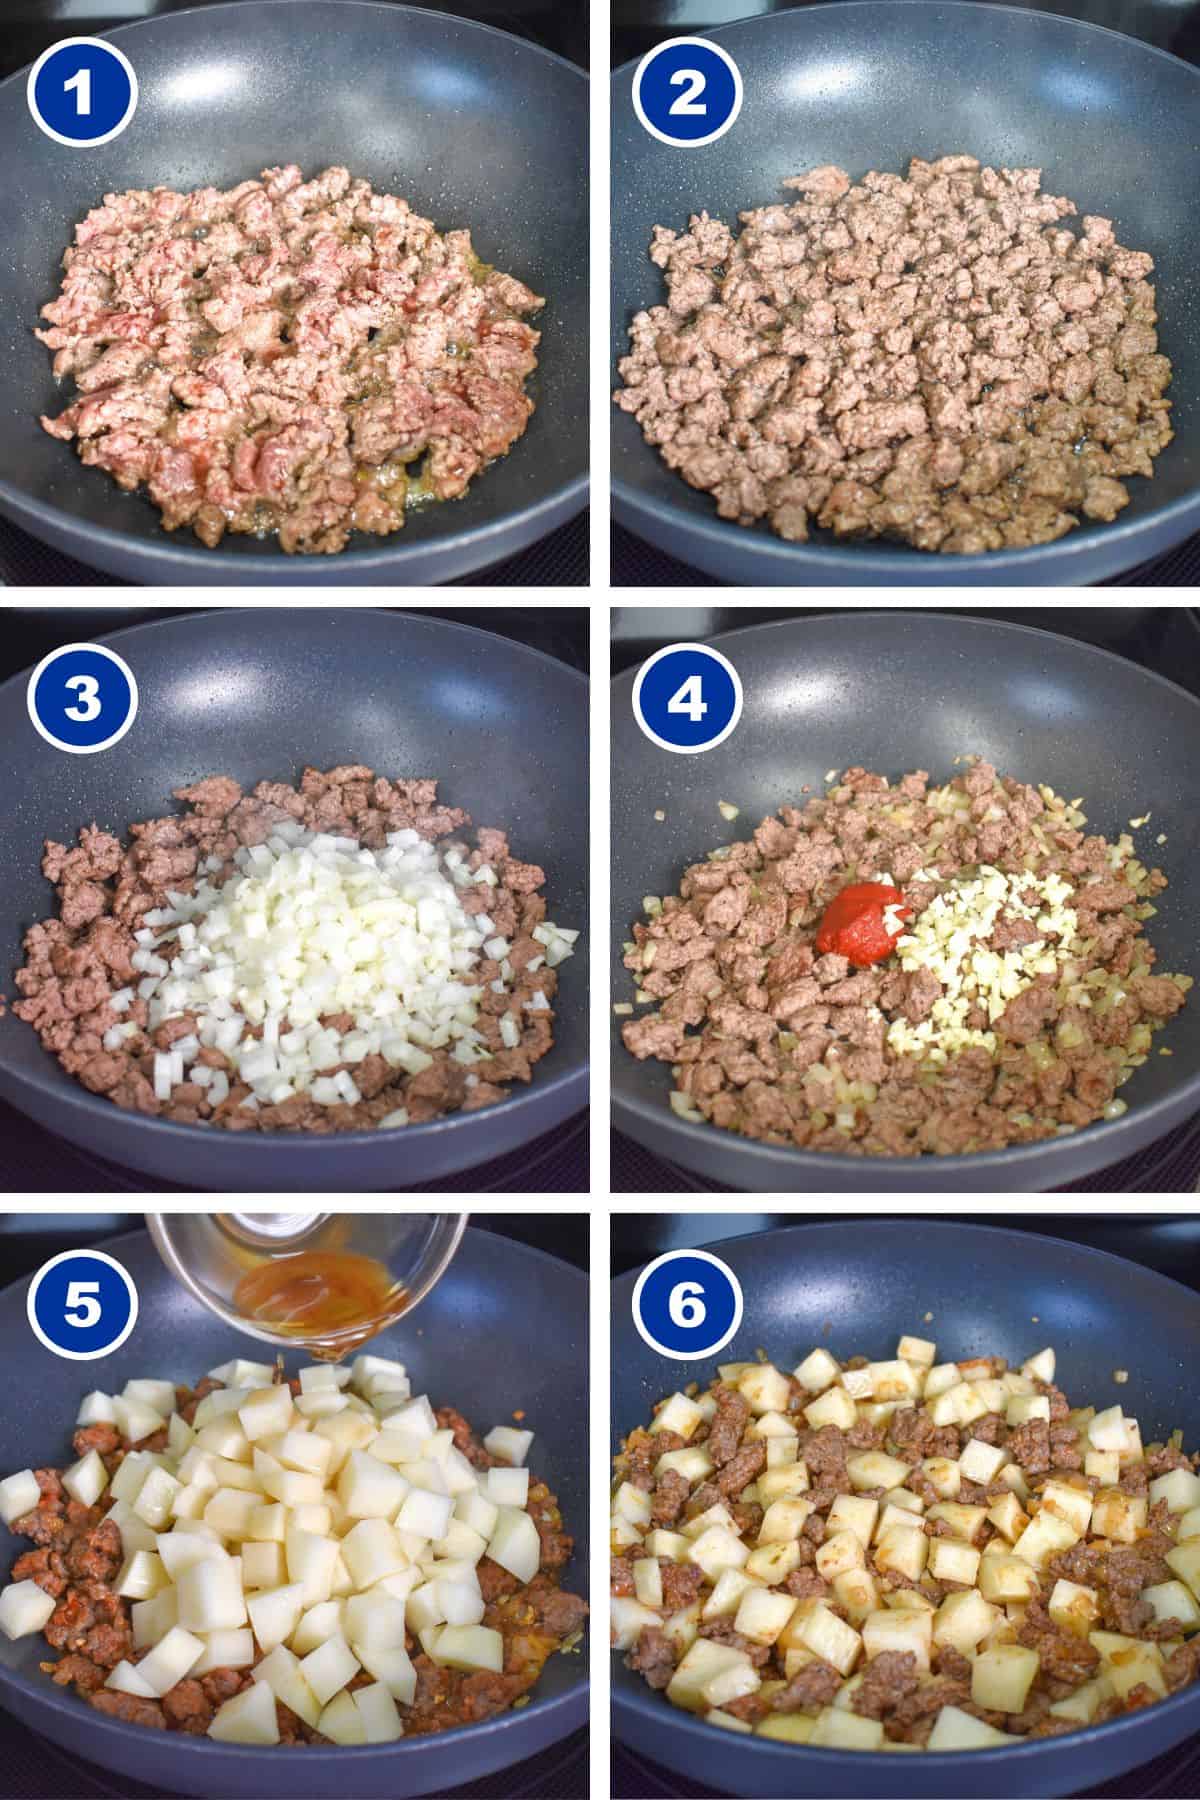 A collage of six images showing the steps to making the beef and potatoes.